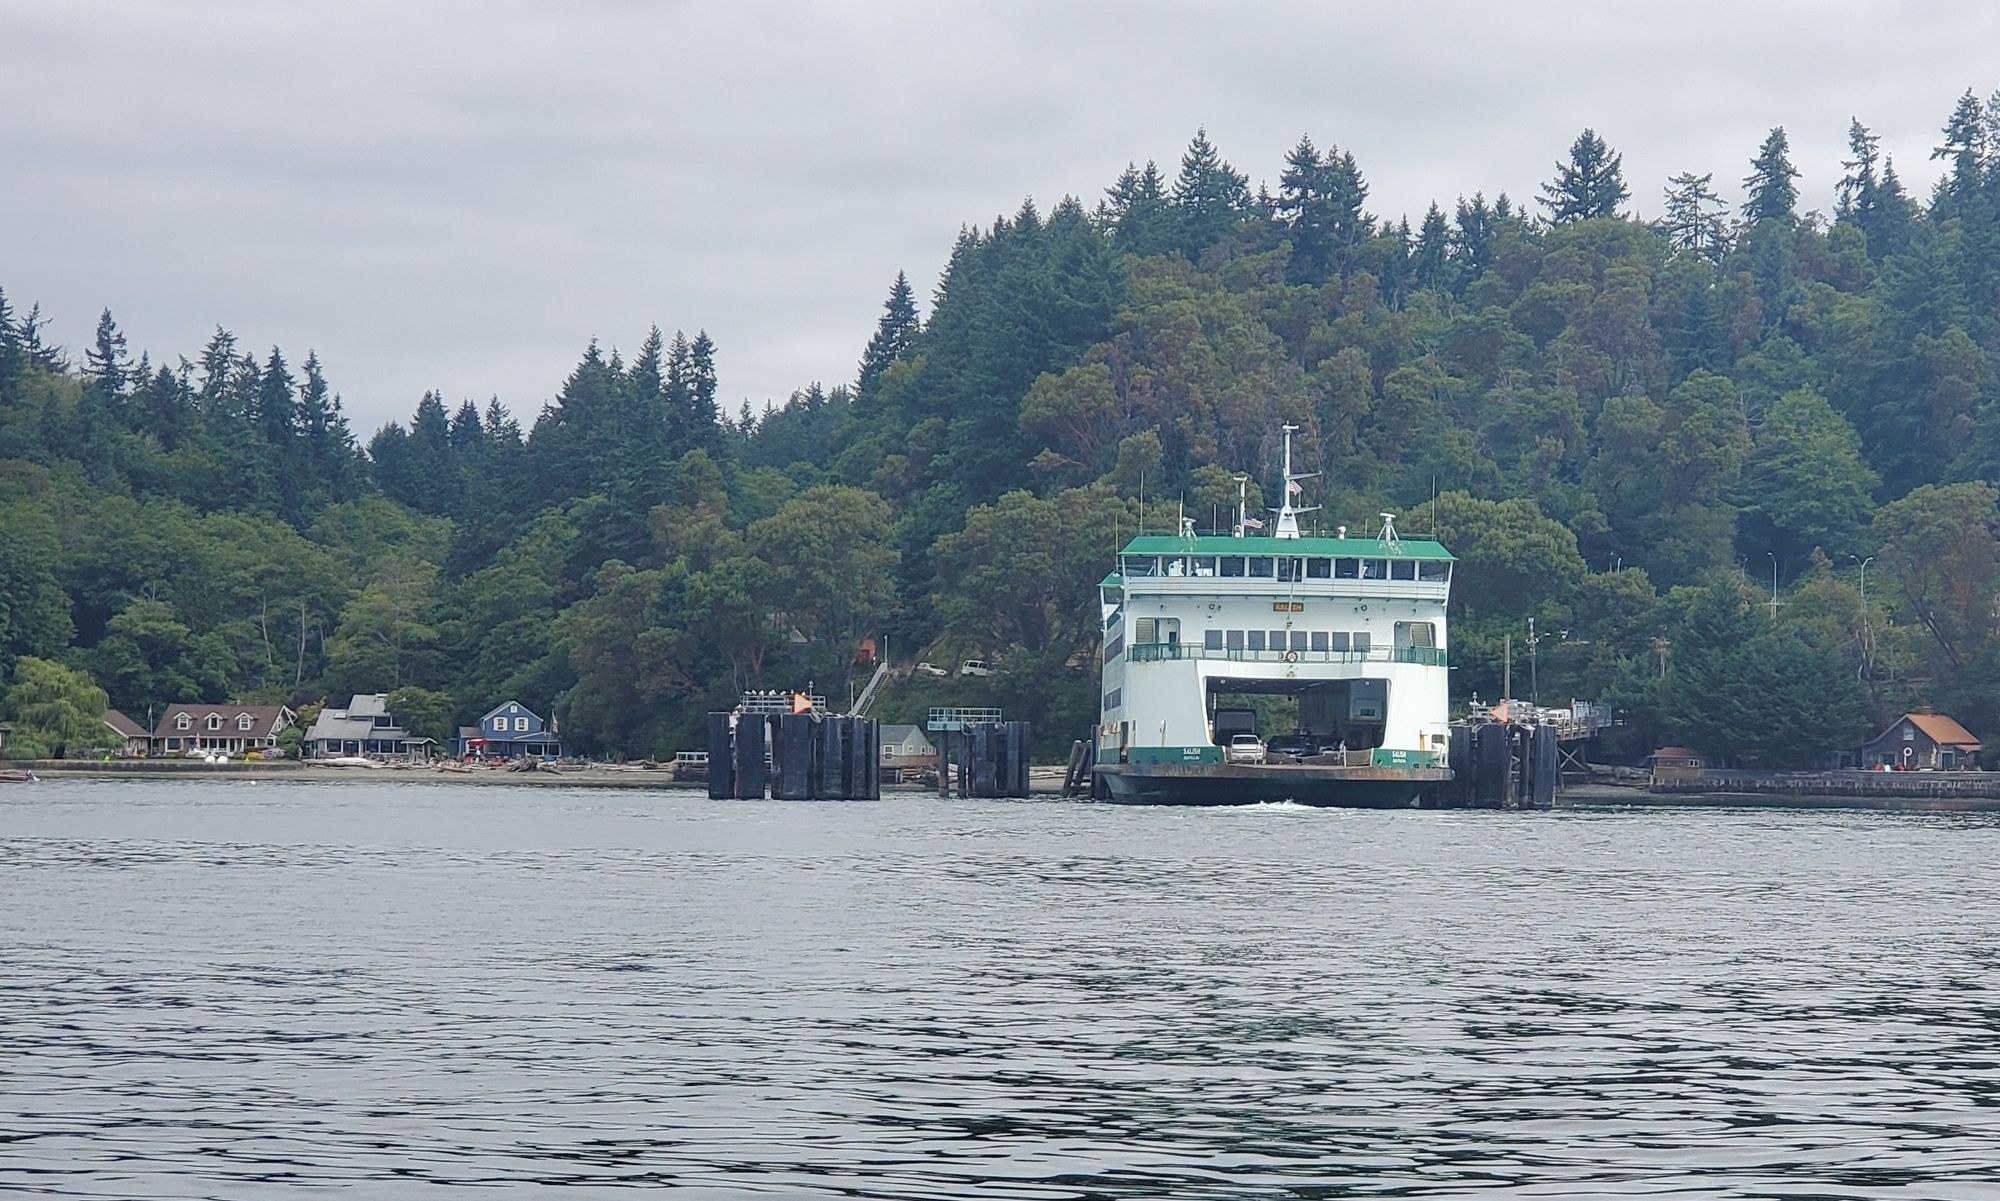 A green and white car ferry docked with trees and a few houses behind it.